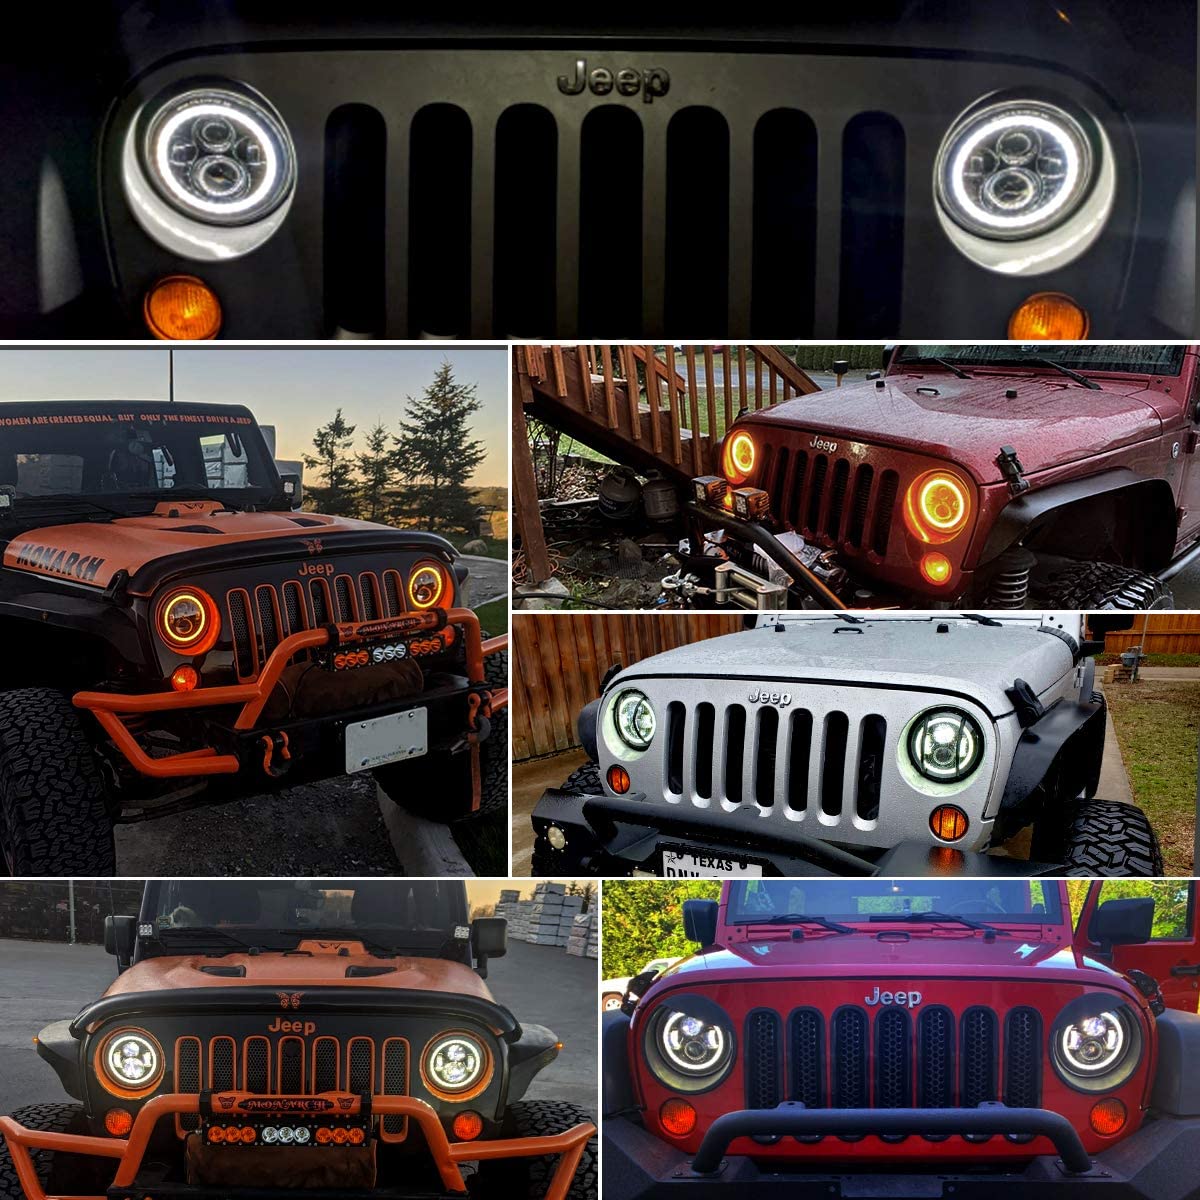 GXENOGO 7 Inch LED Halo Headlights with Turn Signal Amber White DRL Compatible with 2007-2017 Jeep Wrangler JK JKU Headlamp Replacement-1 Pair Black